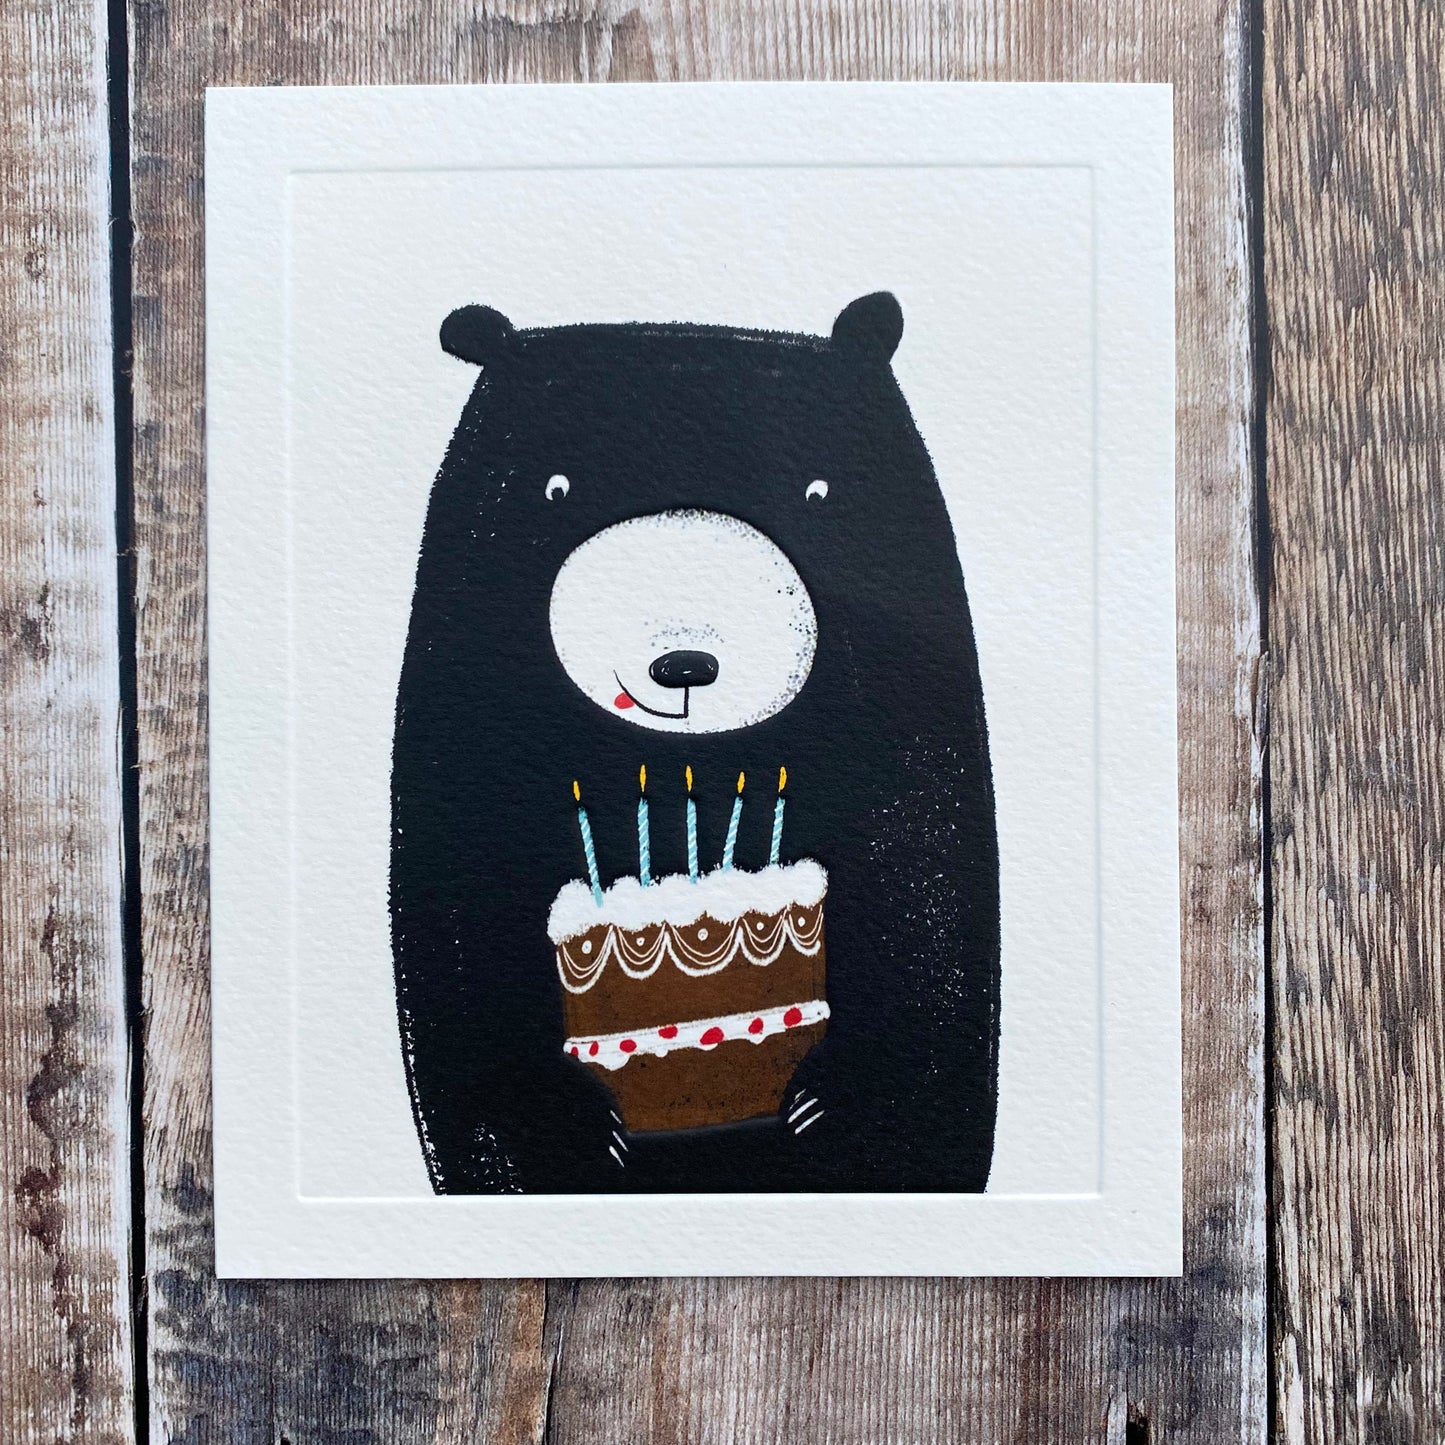 Bear and Birthday Cake by Robert Reader BE12